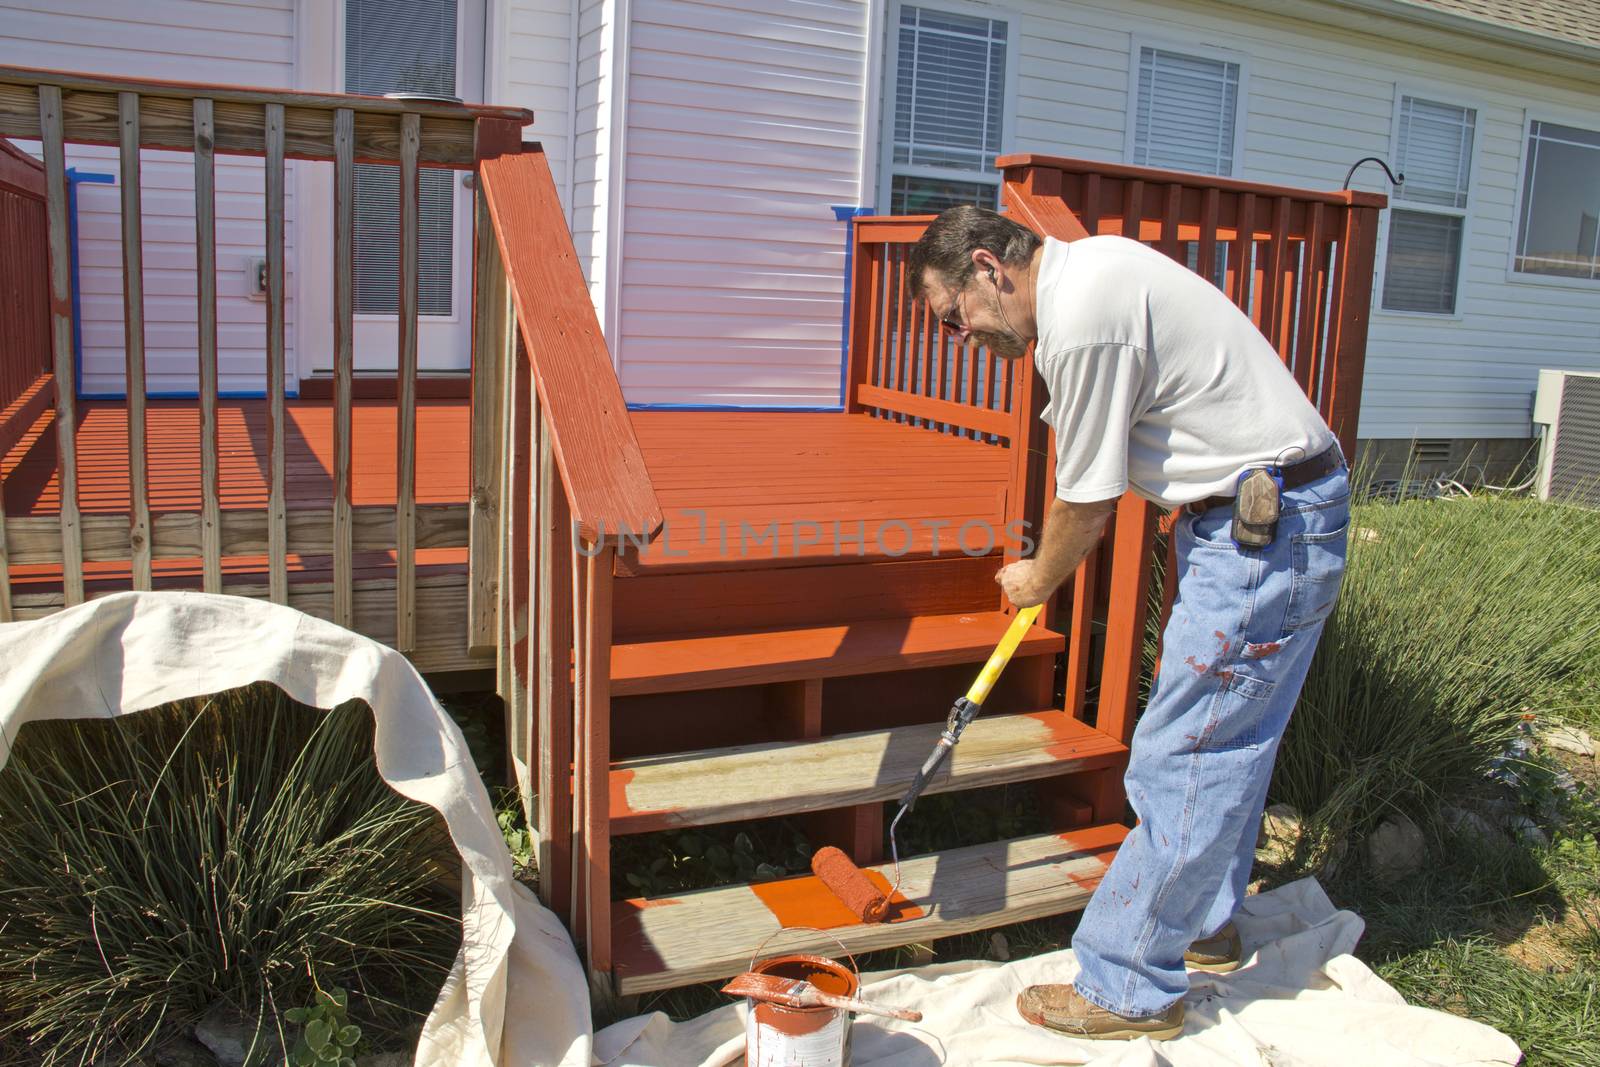 Contract painter staining deck on home to protect it from the weather